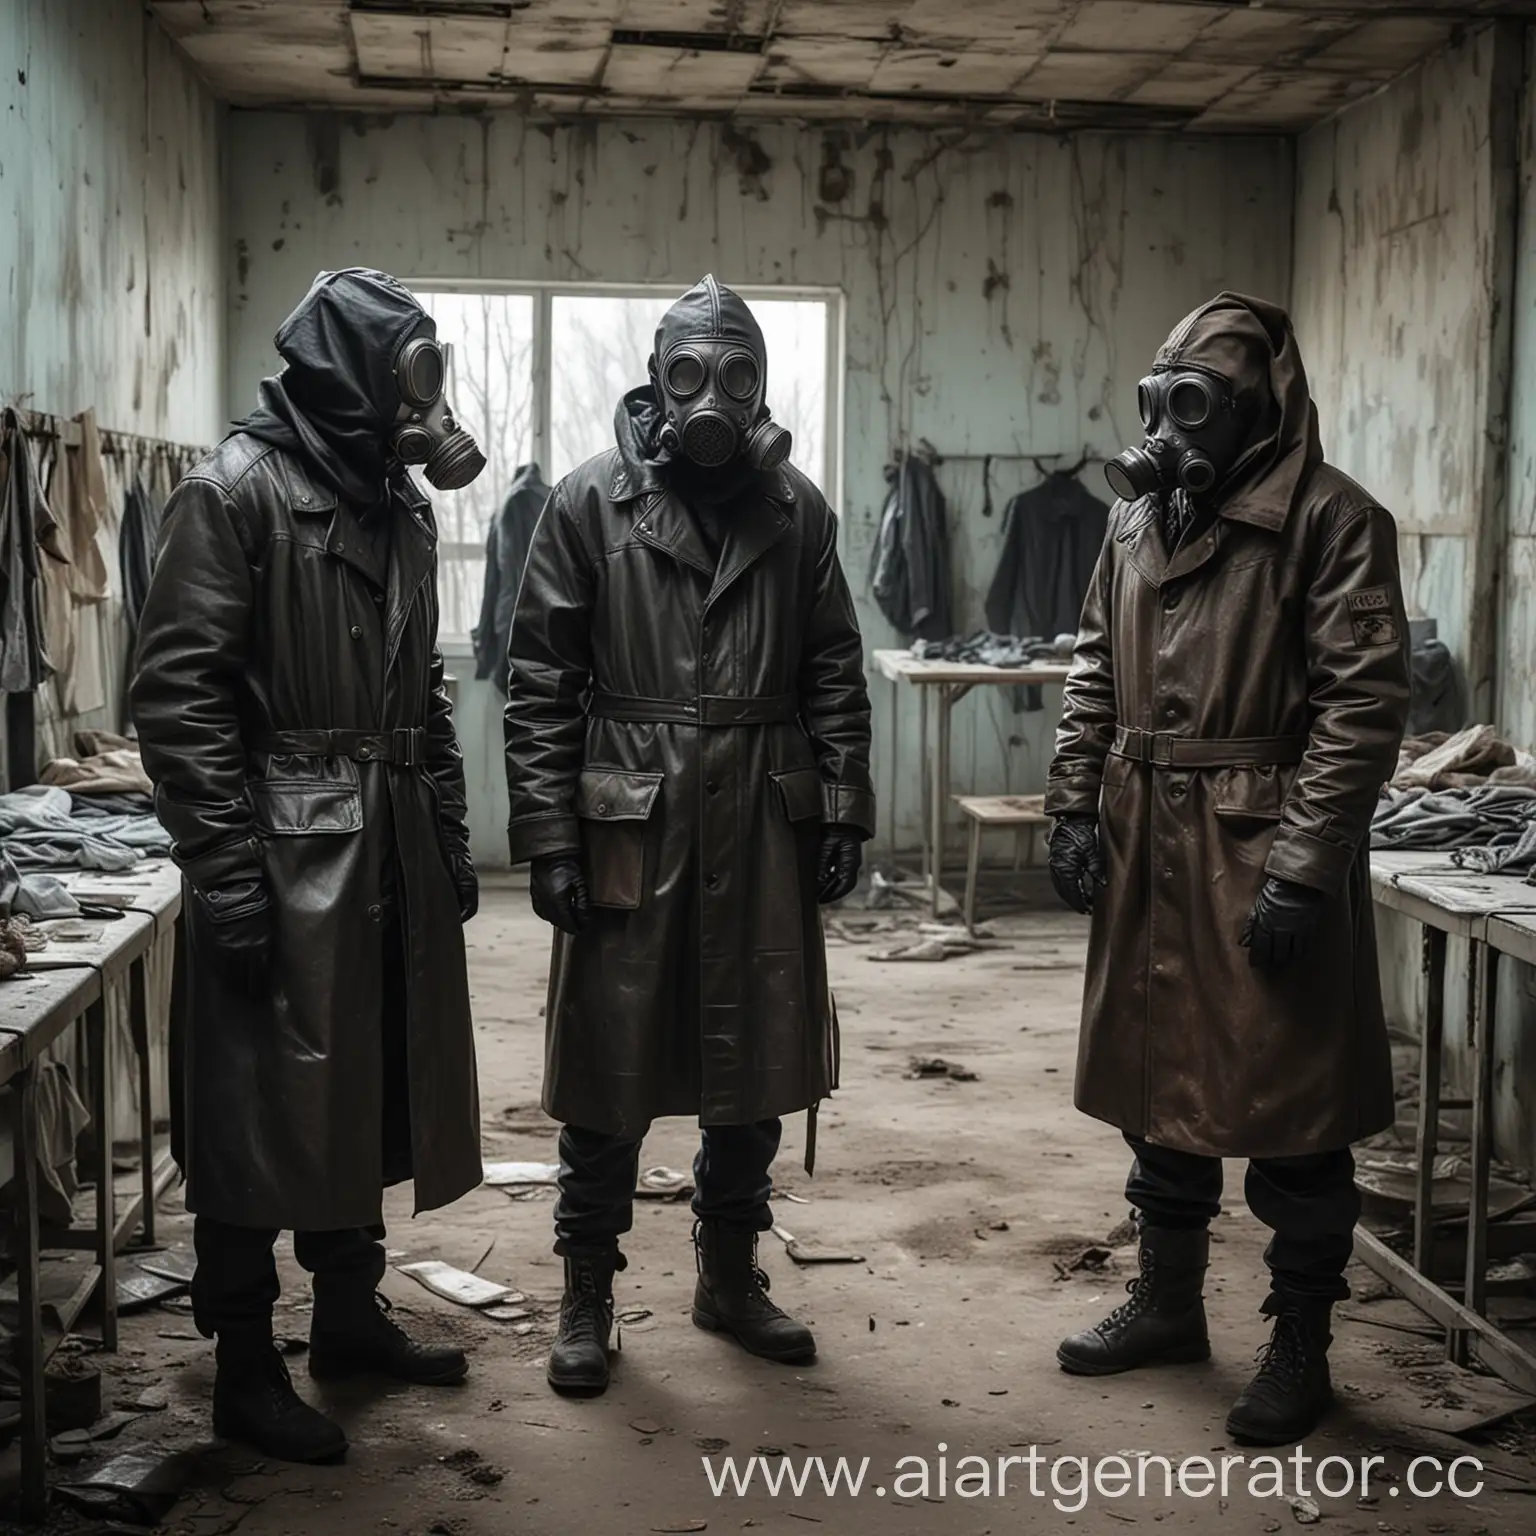 Pripyat-Stalker-Merchant-and-Bodyguard-at-the-Laundry